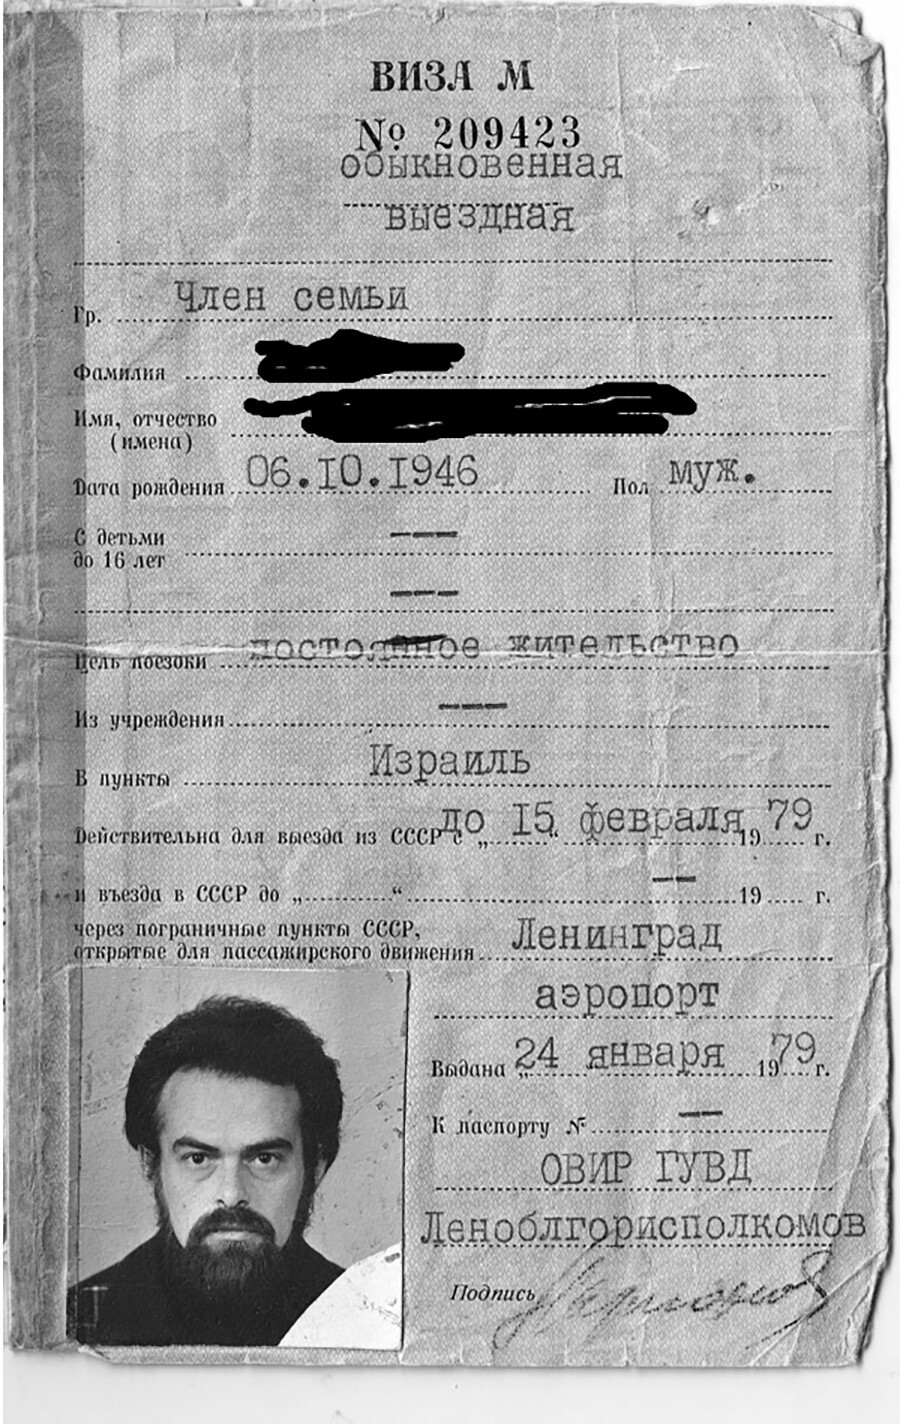 Soviet exit visa of the second kind (allowing to leave the USSR permanently).